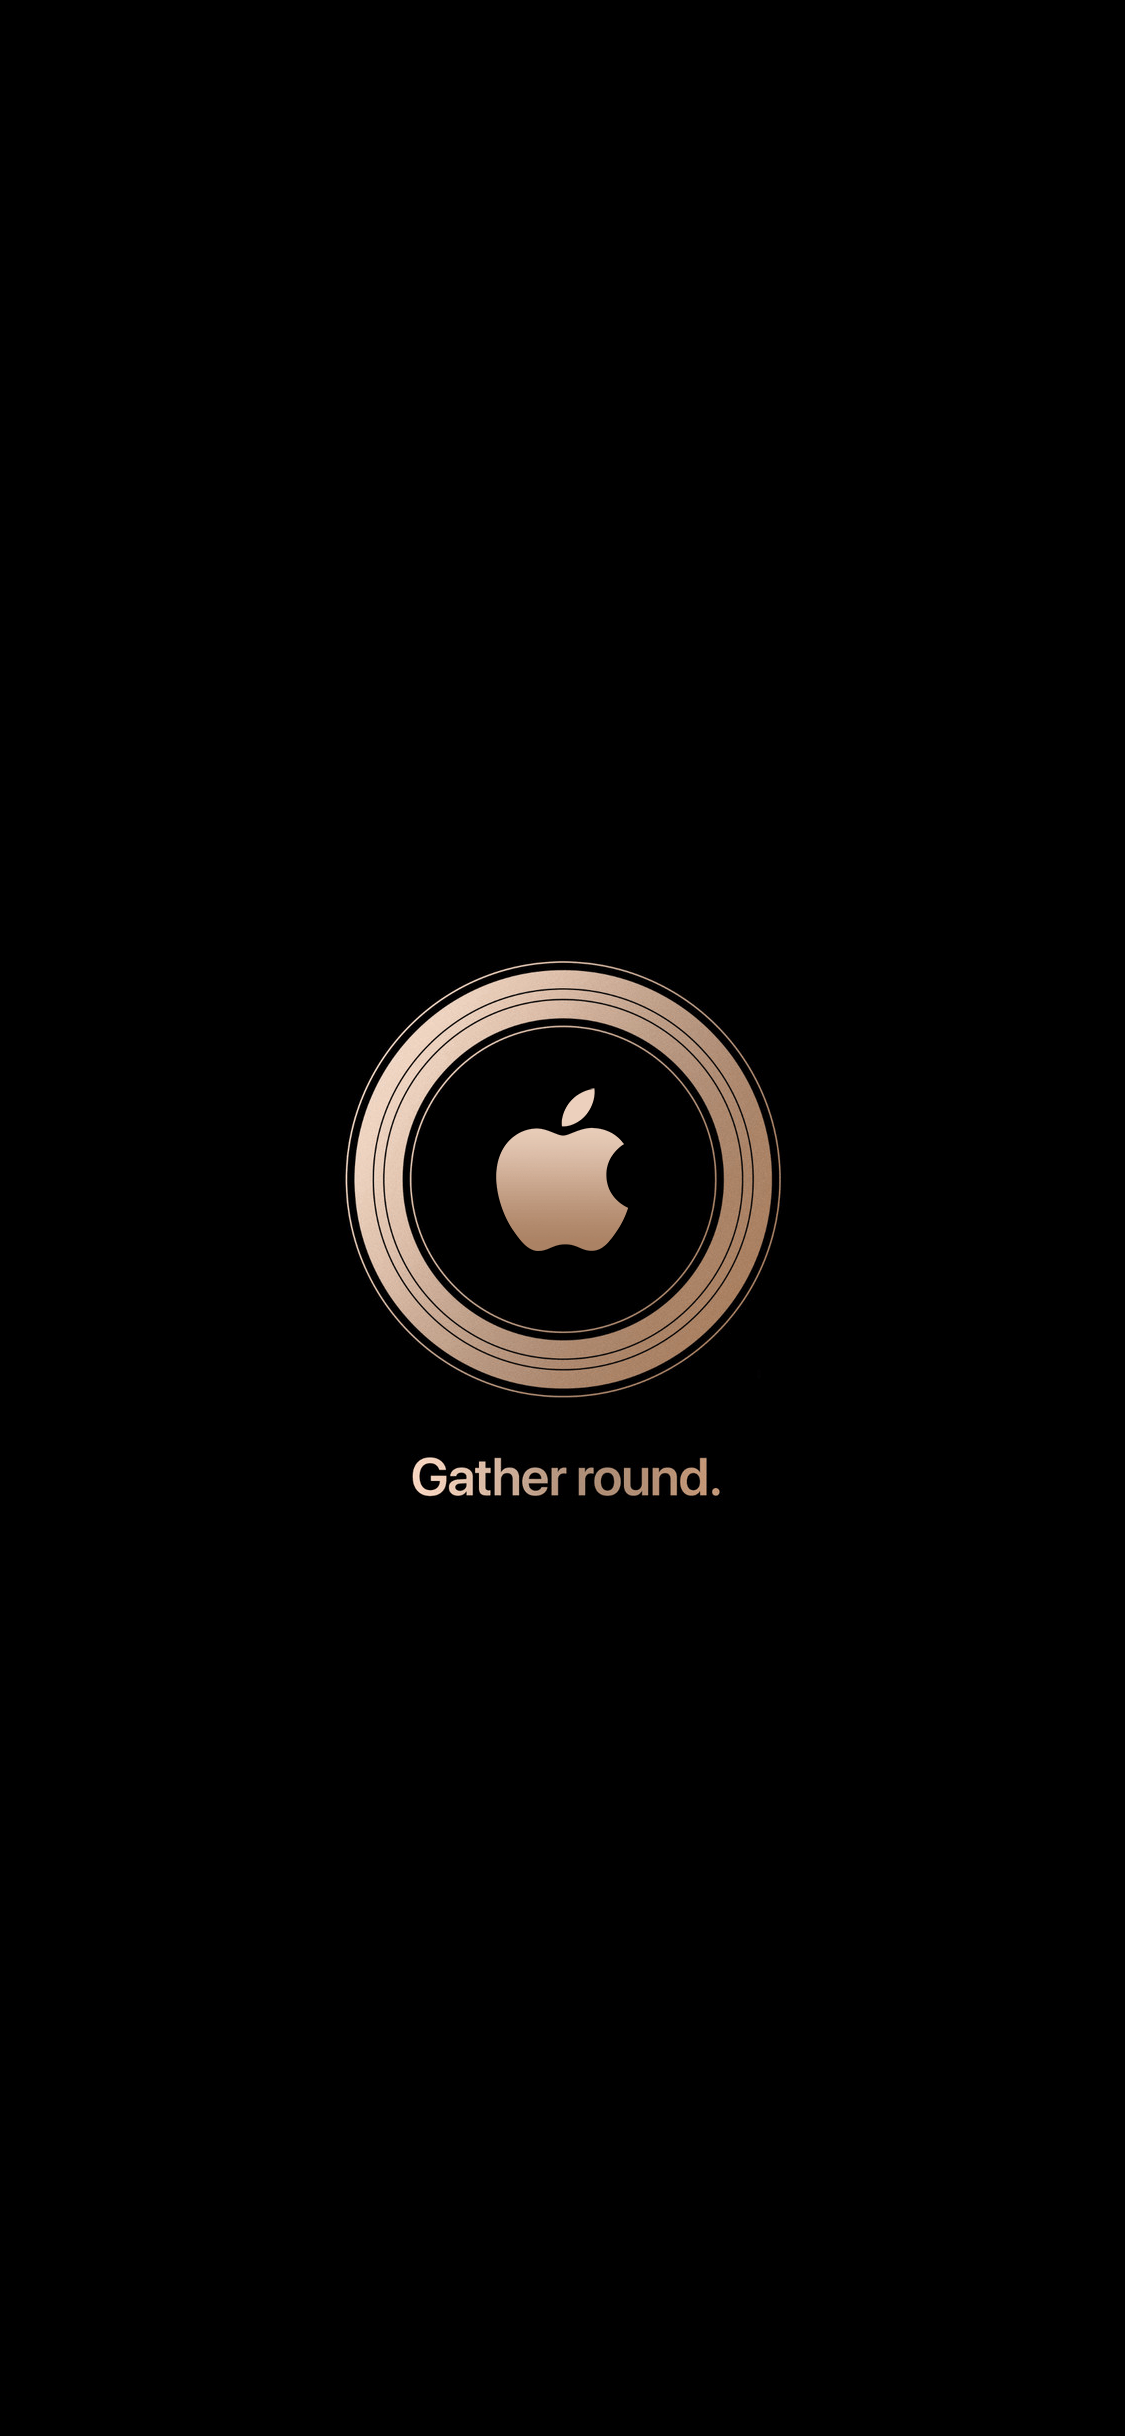 Circle X Logo - Gather round Apple event wallpapers